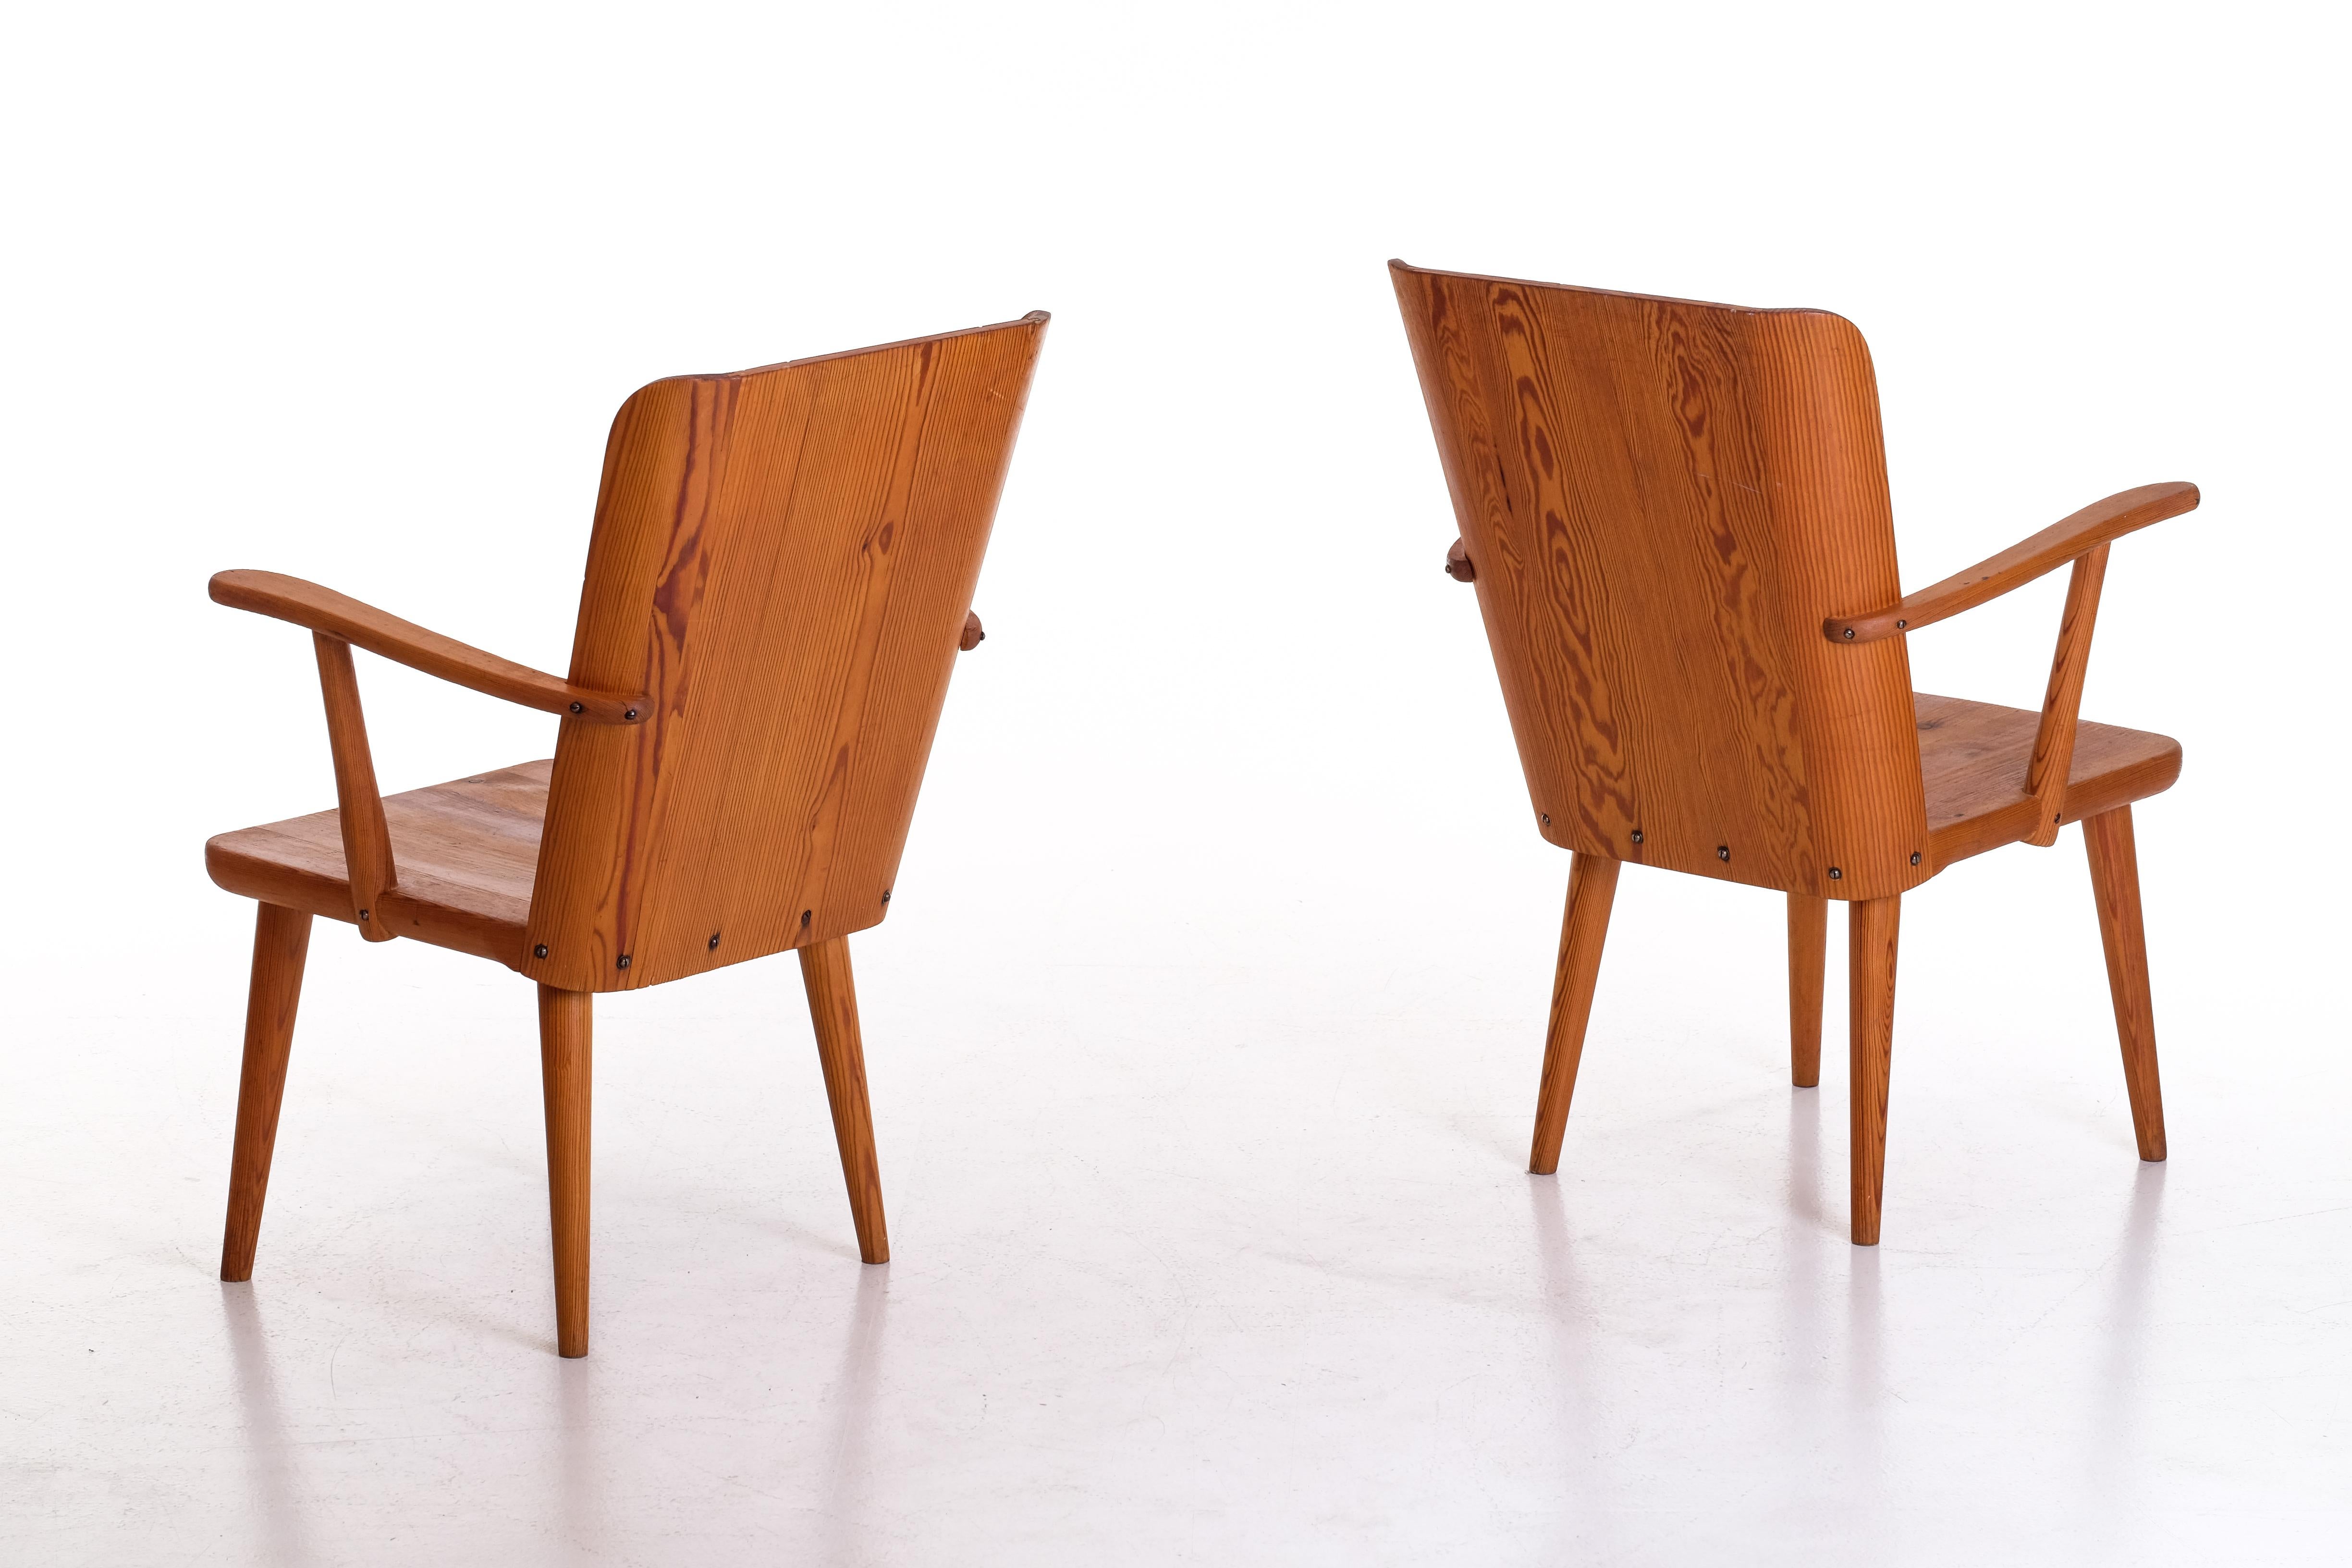 Mid-20th Century Pair of Swedish Pine Chairs by Göran Malmvall, 1950s For Sale